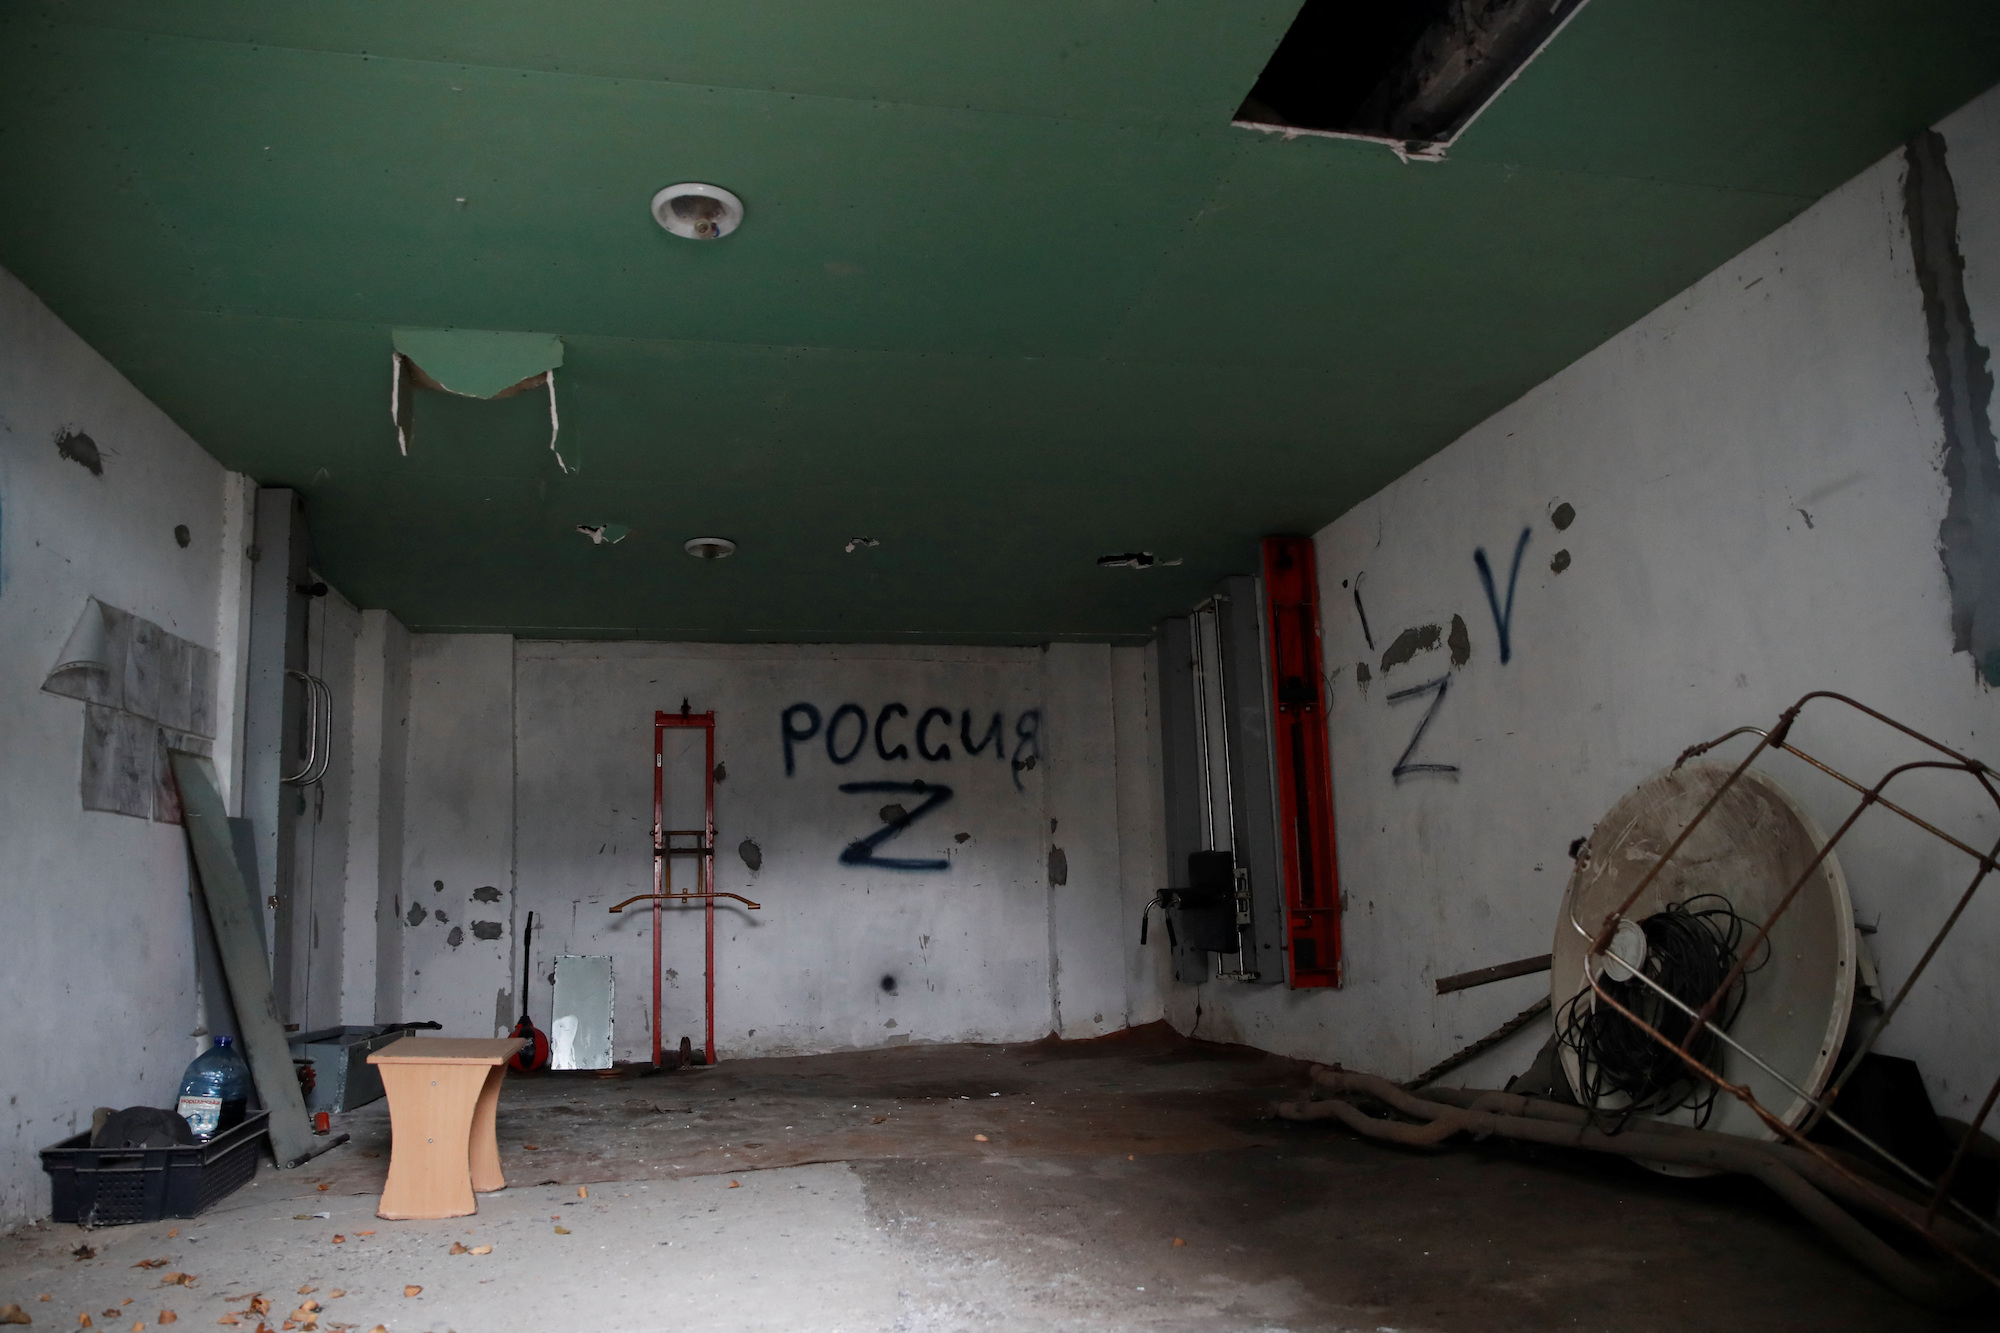 A view from a detention center on Wednesday, which Ukrainians say was used by Russian forces to jail and torture people before they retreated from Kherson.